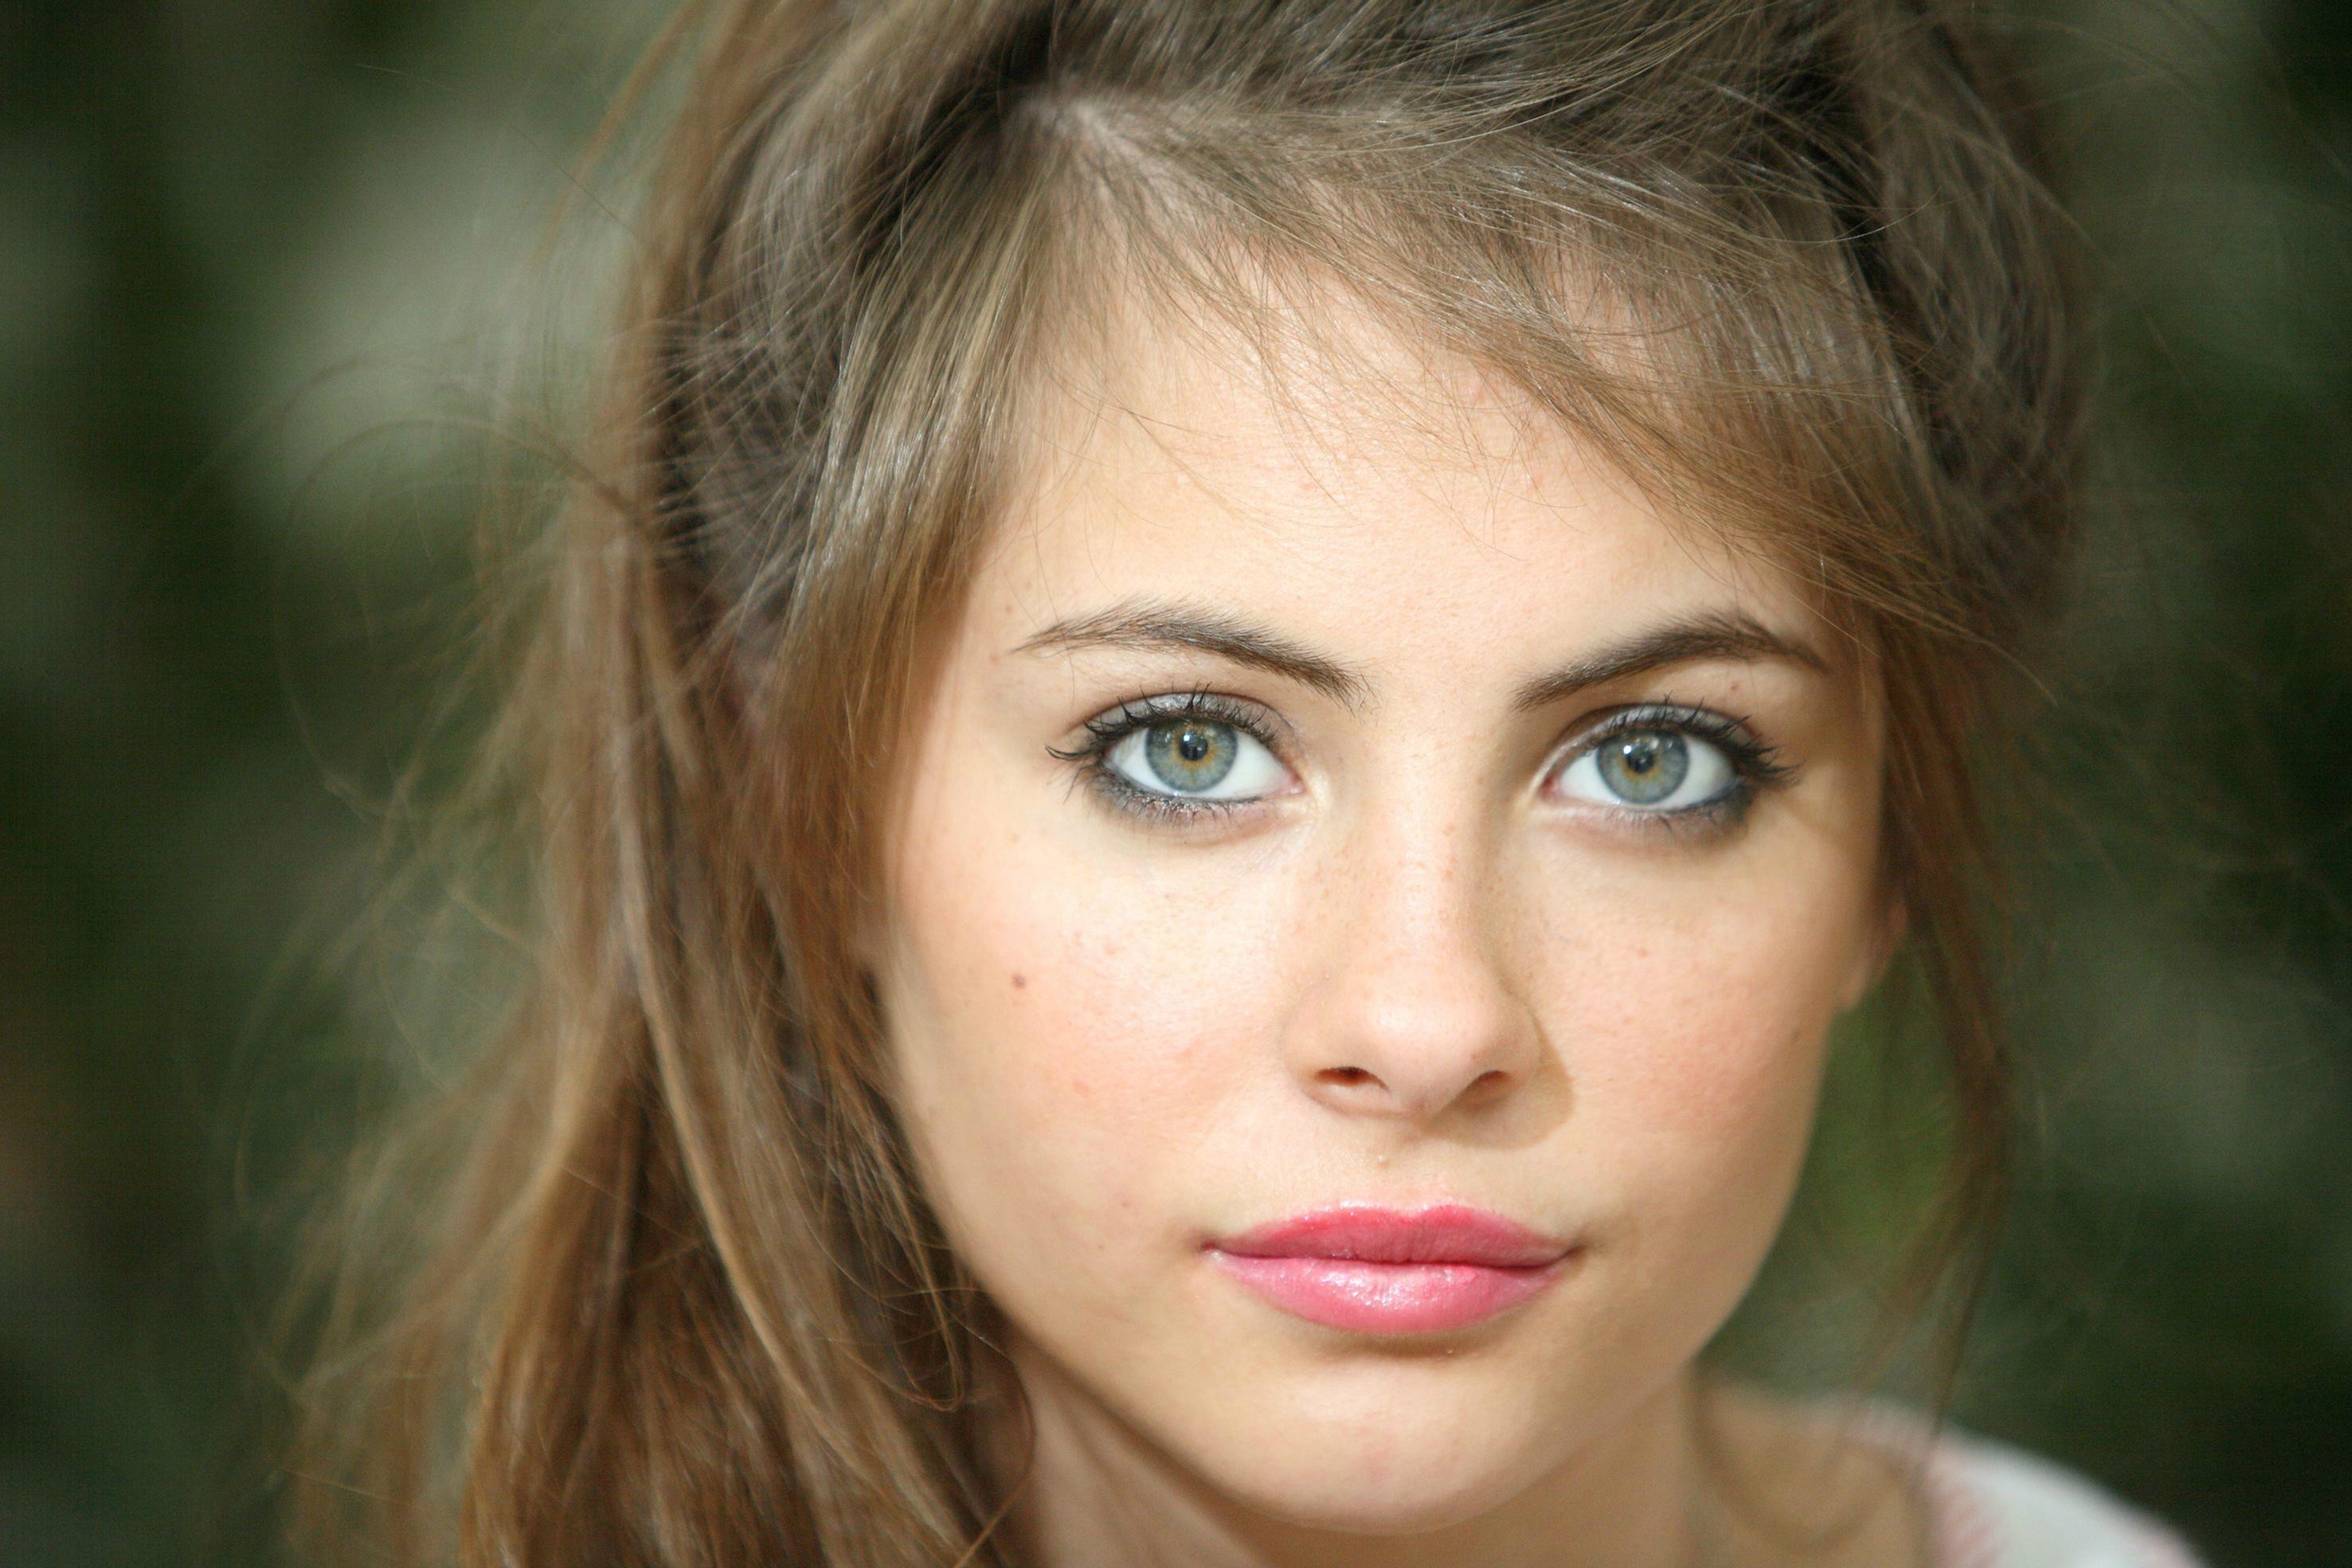 Brunette Willa Holland American Wallpapers